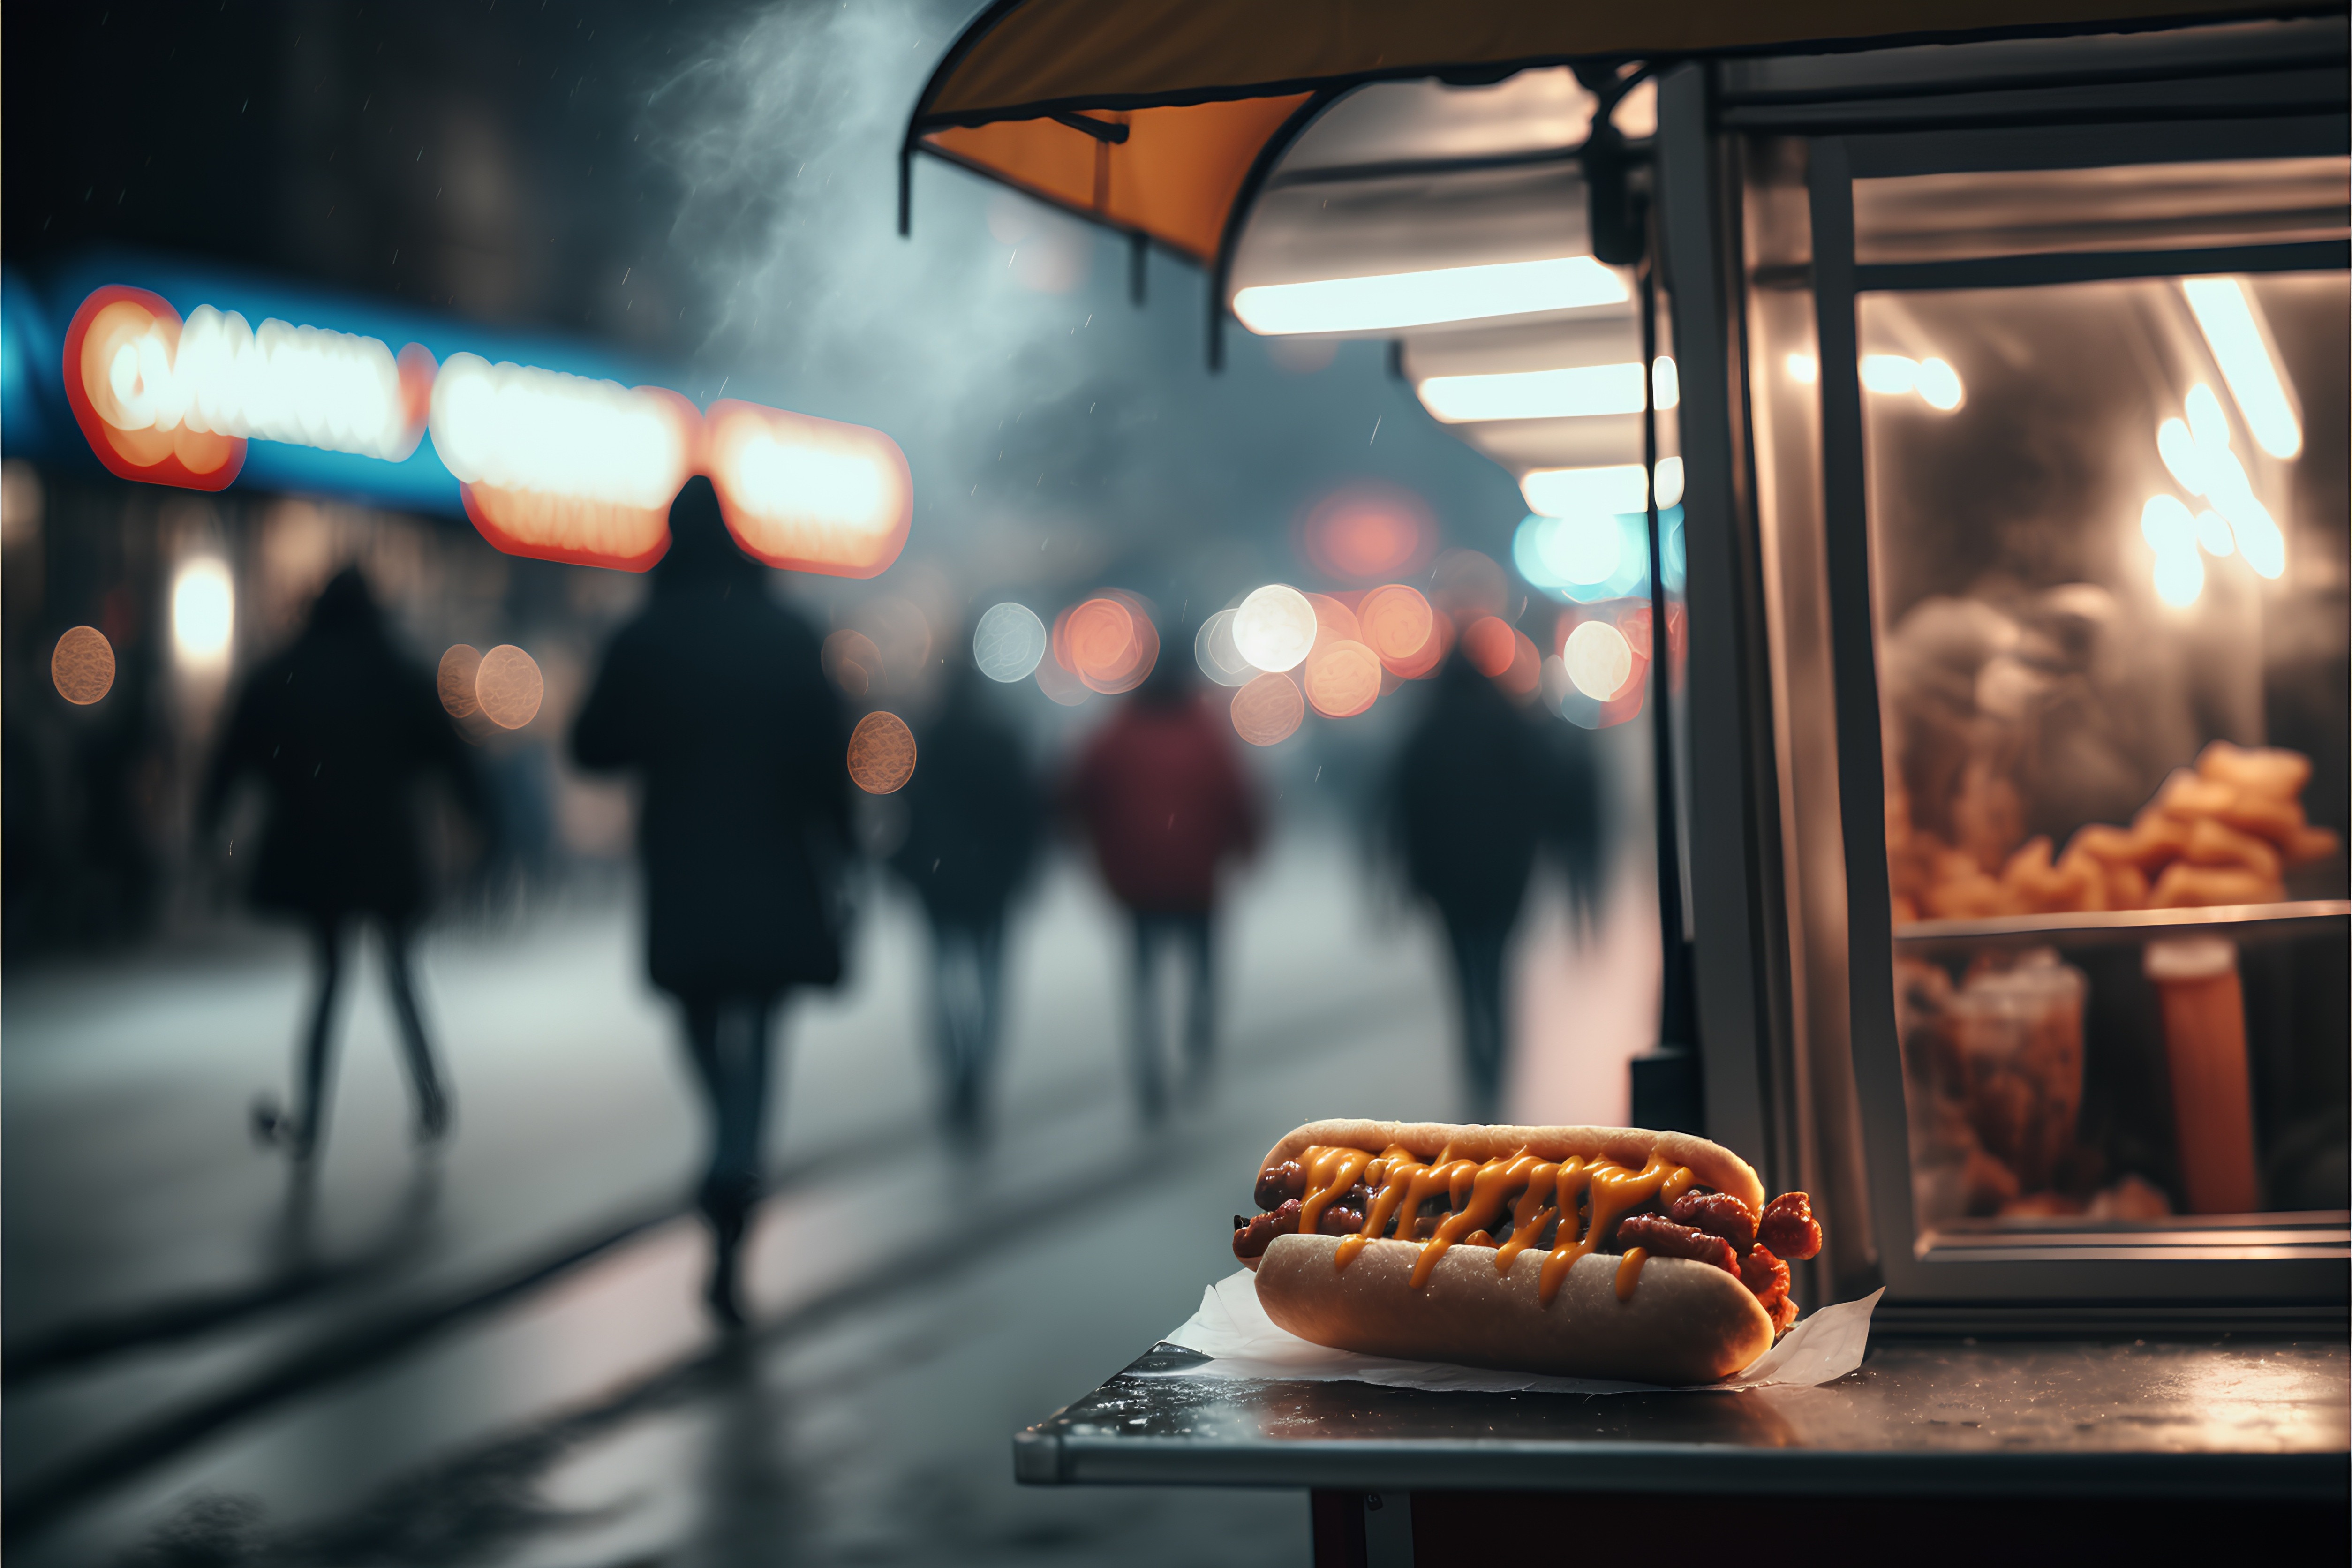 Hot dogs with mustard on the street at night. Street food concept